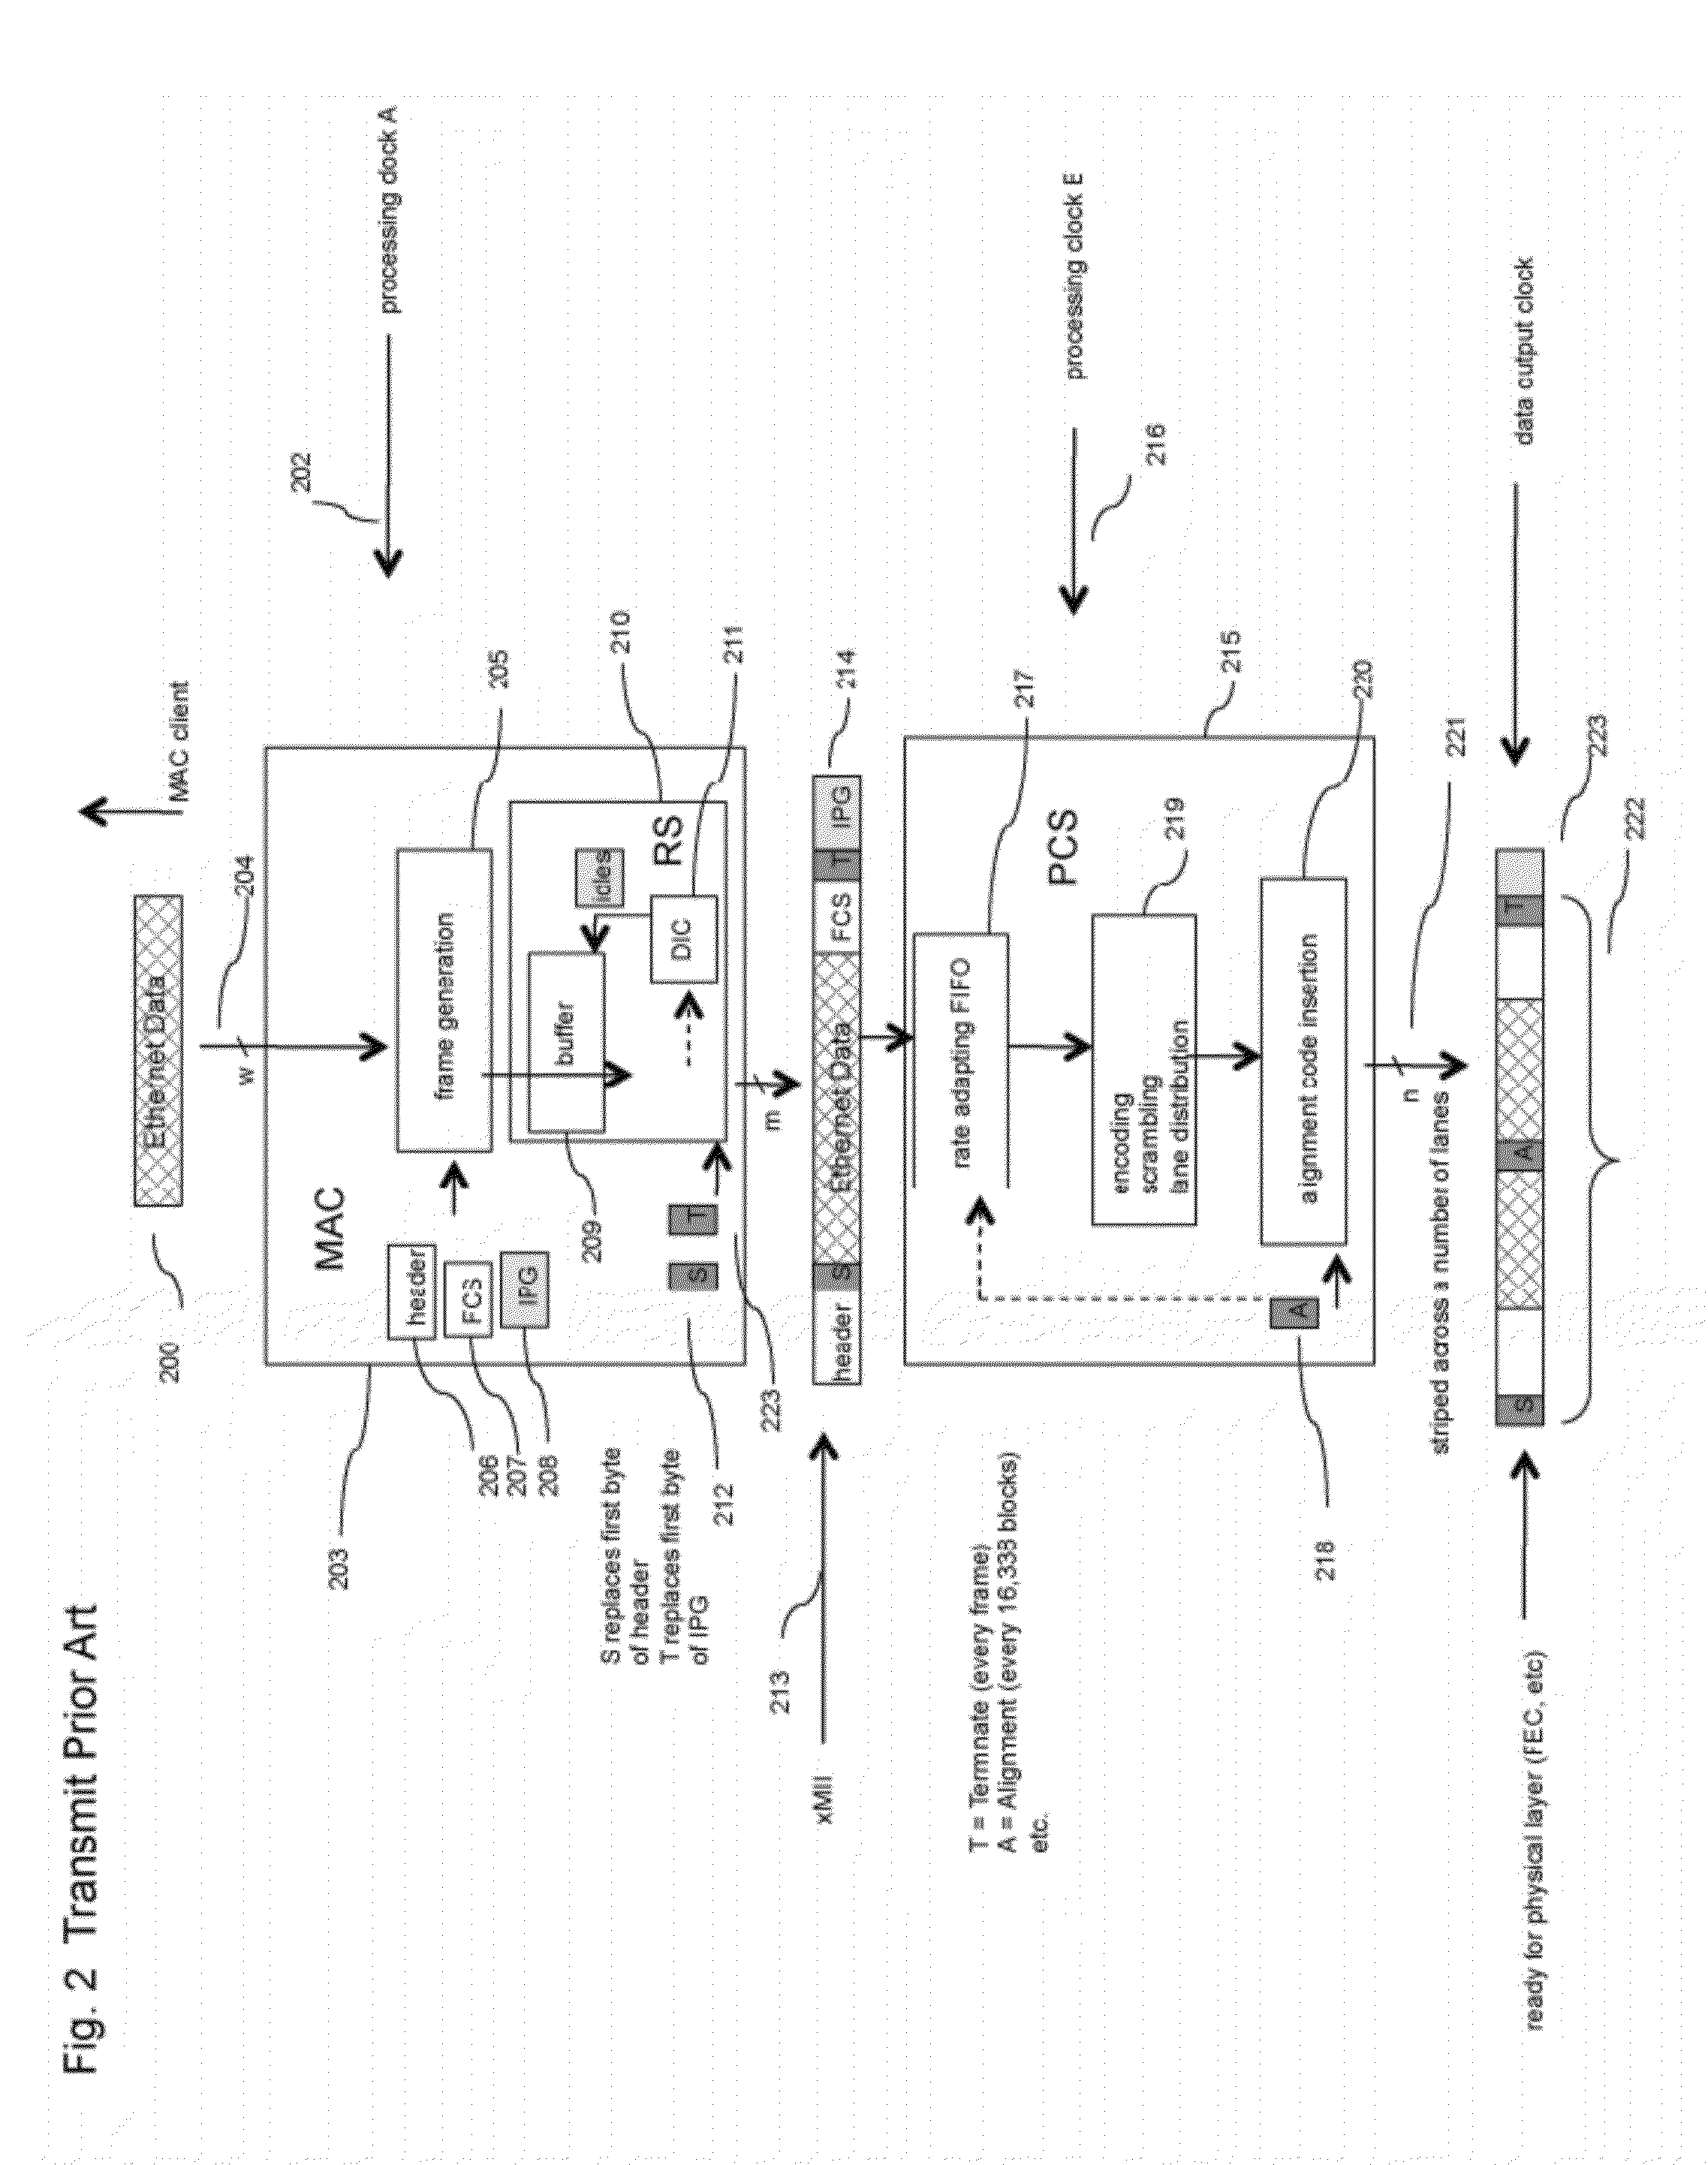 Packet Network Interface Apparatus and Method